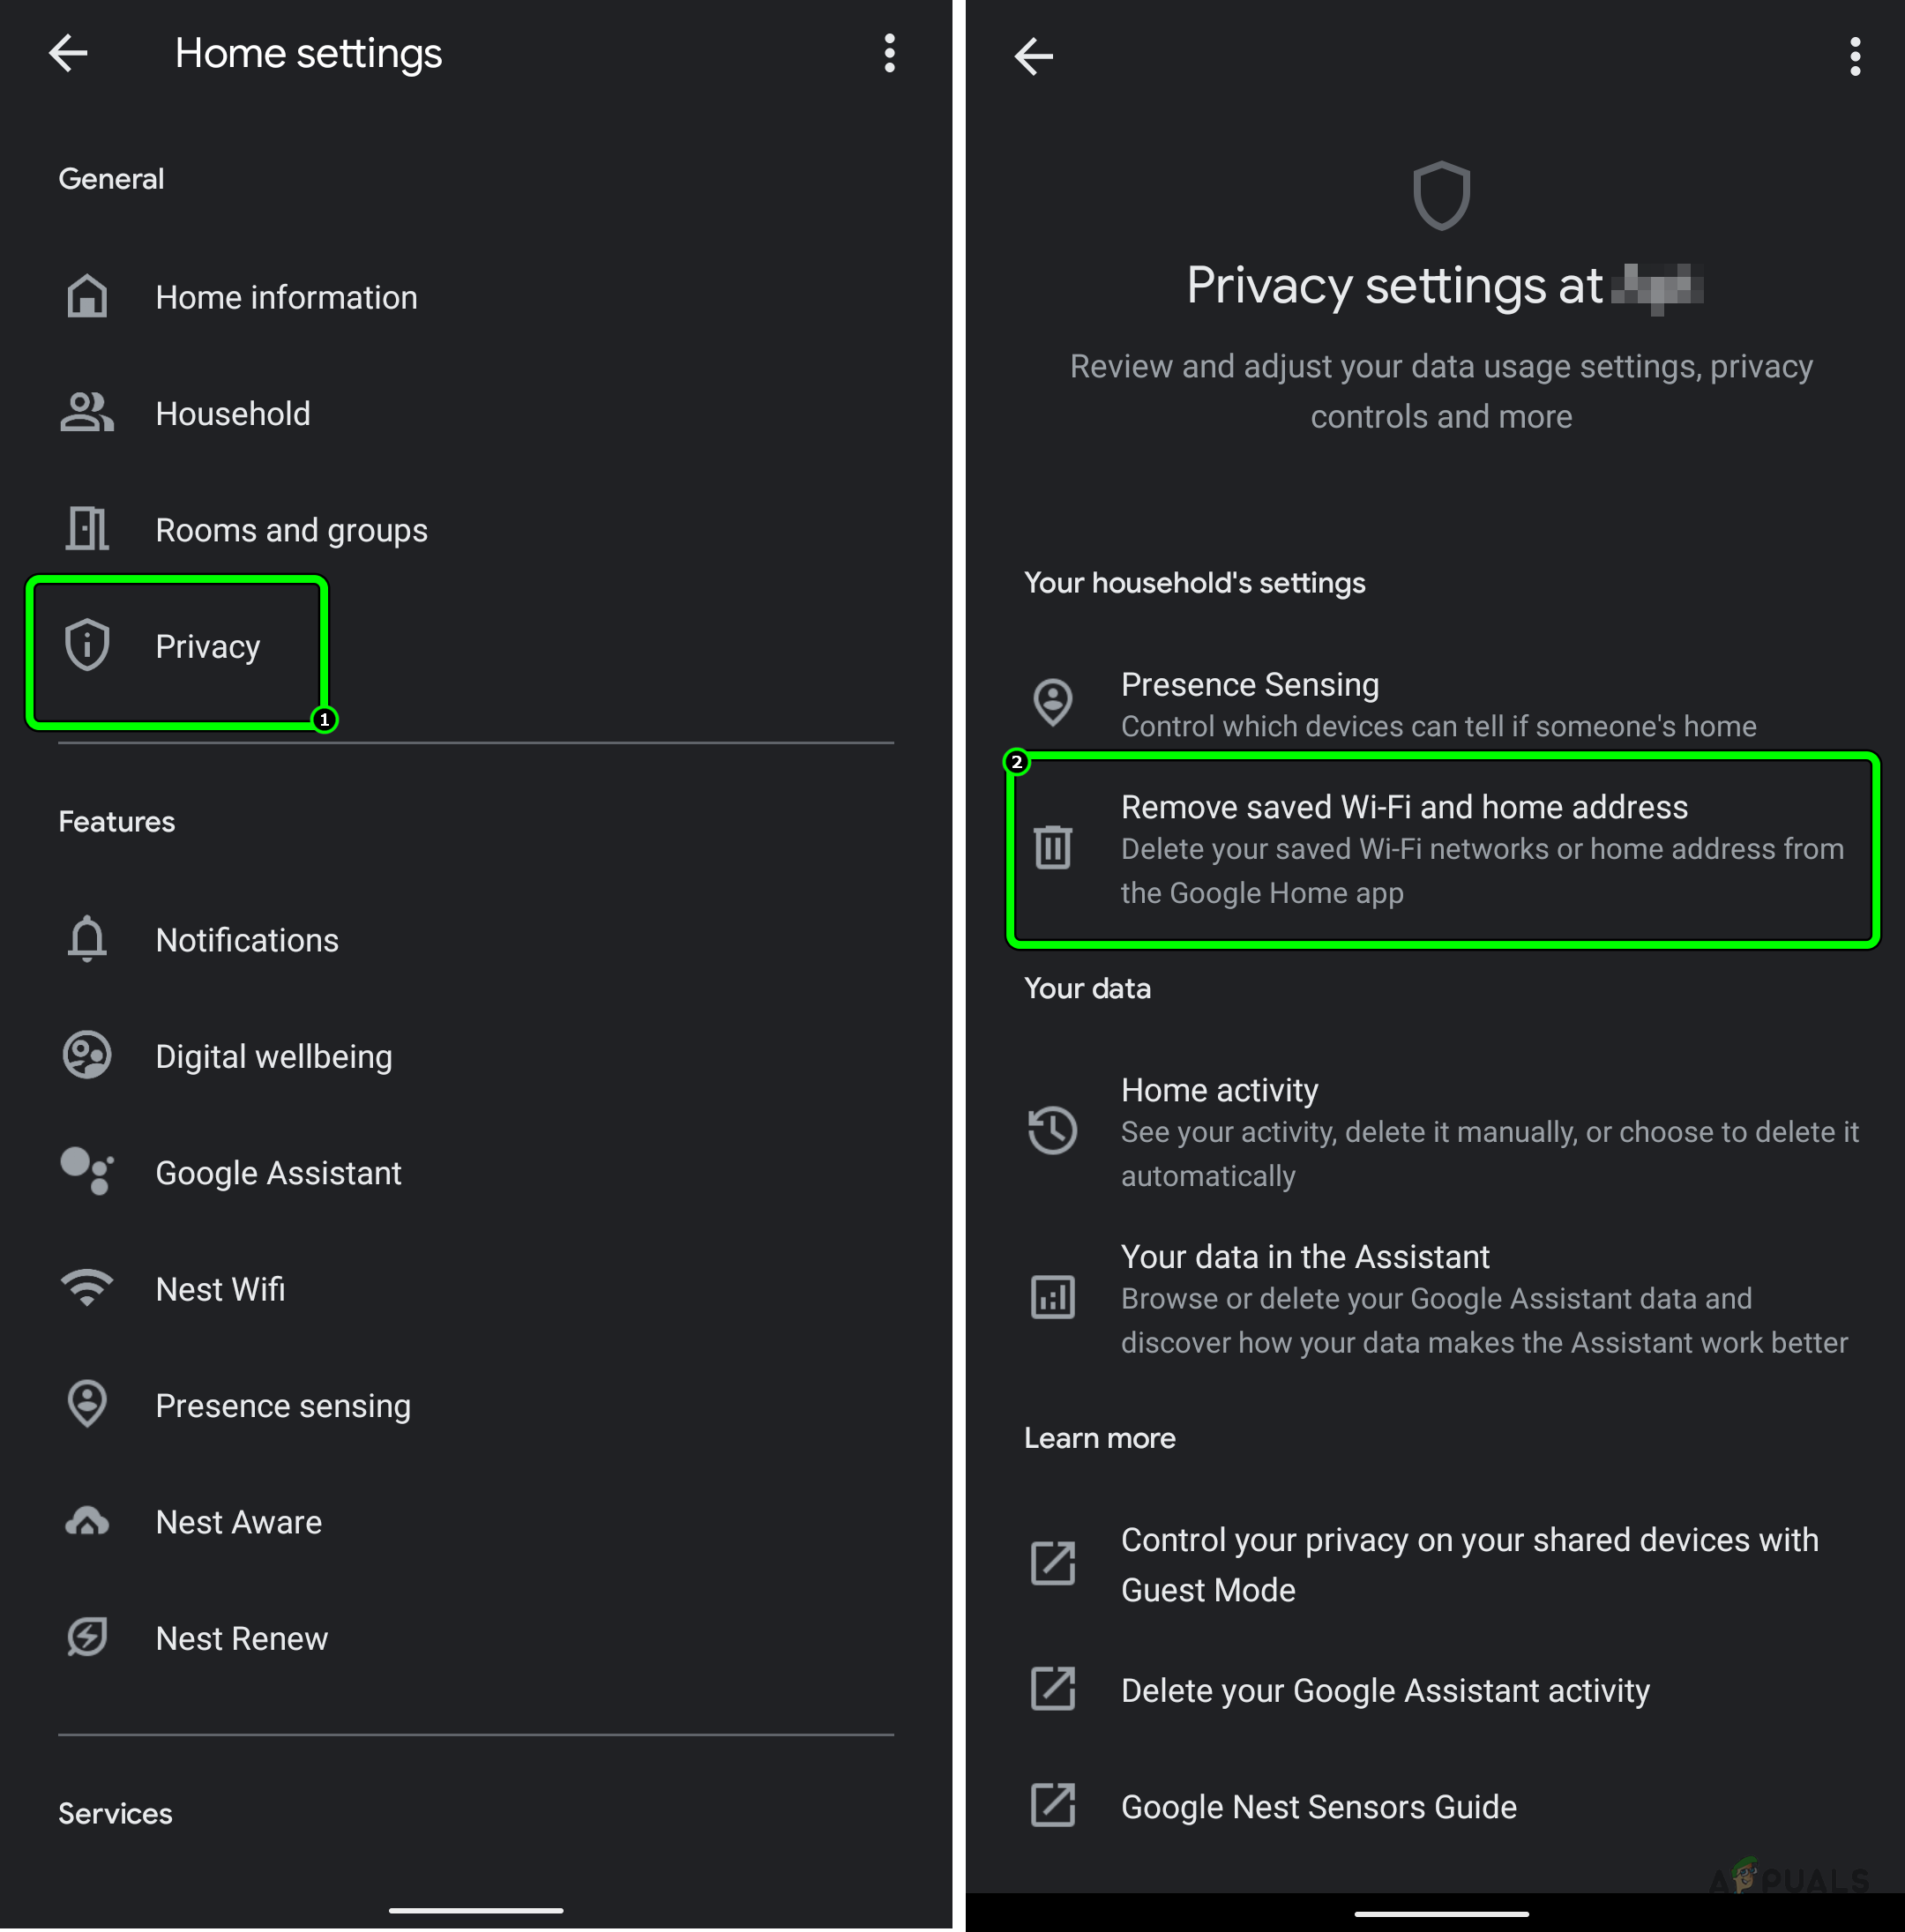 Remove Saved Wi-Fi and Home Address in the Privacy Settings of the Google Home App